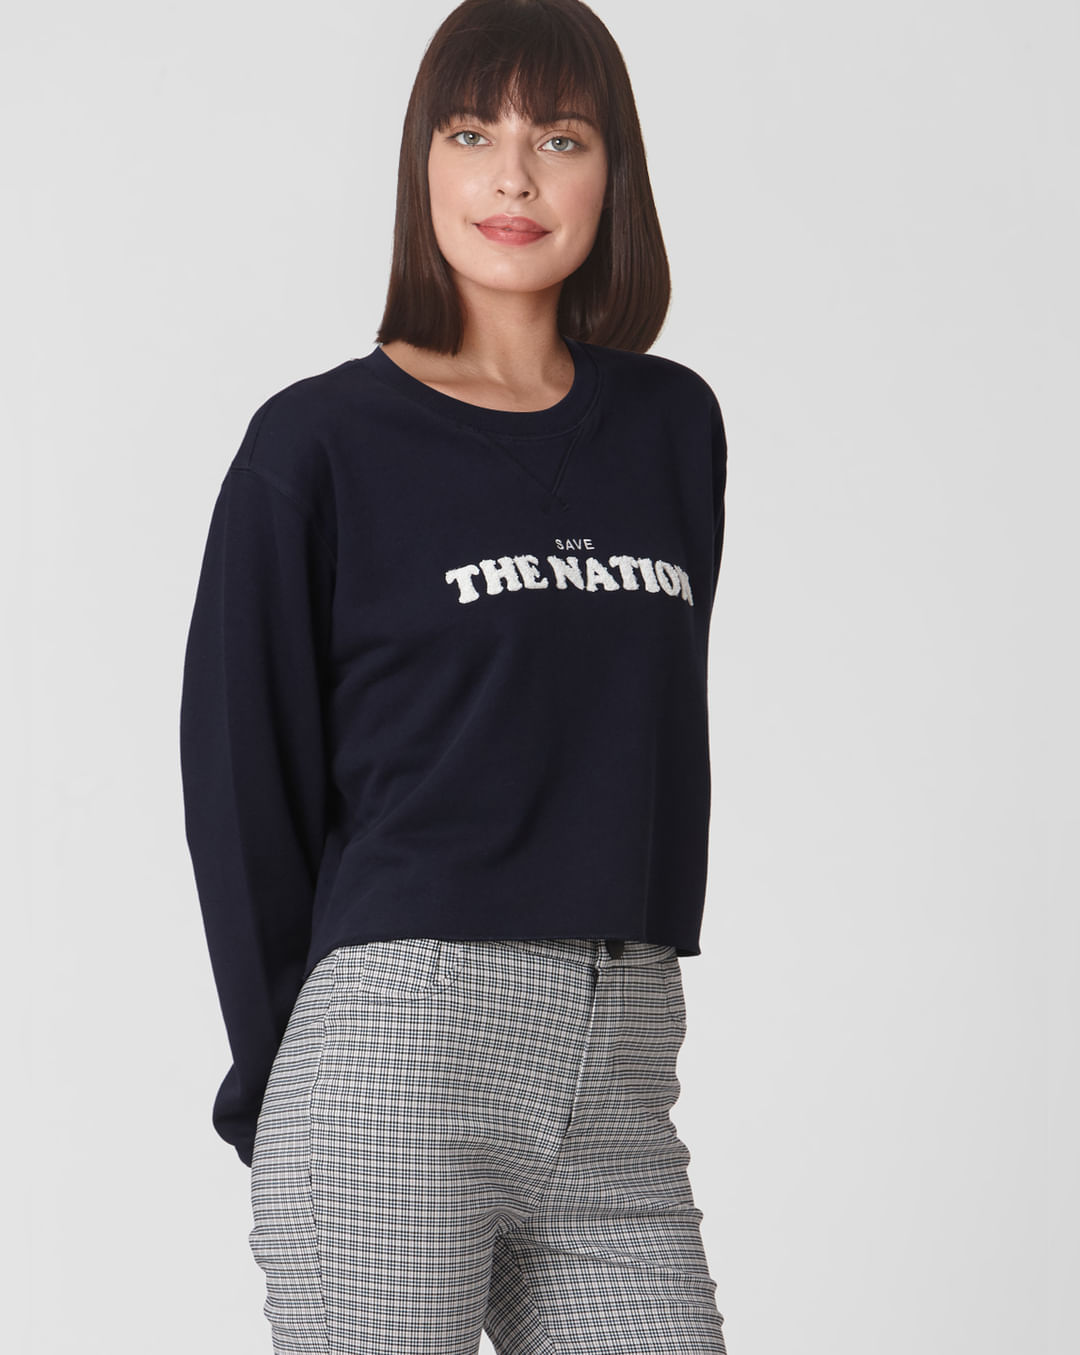 Buy Blue Text Print Cropped Sweatshirt Online In India.